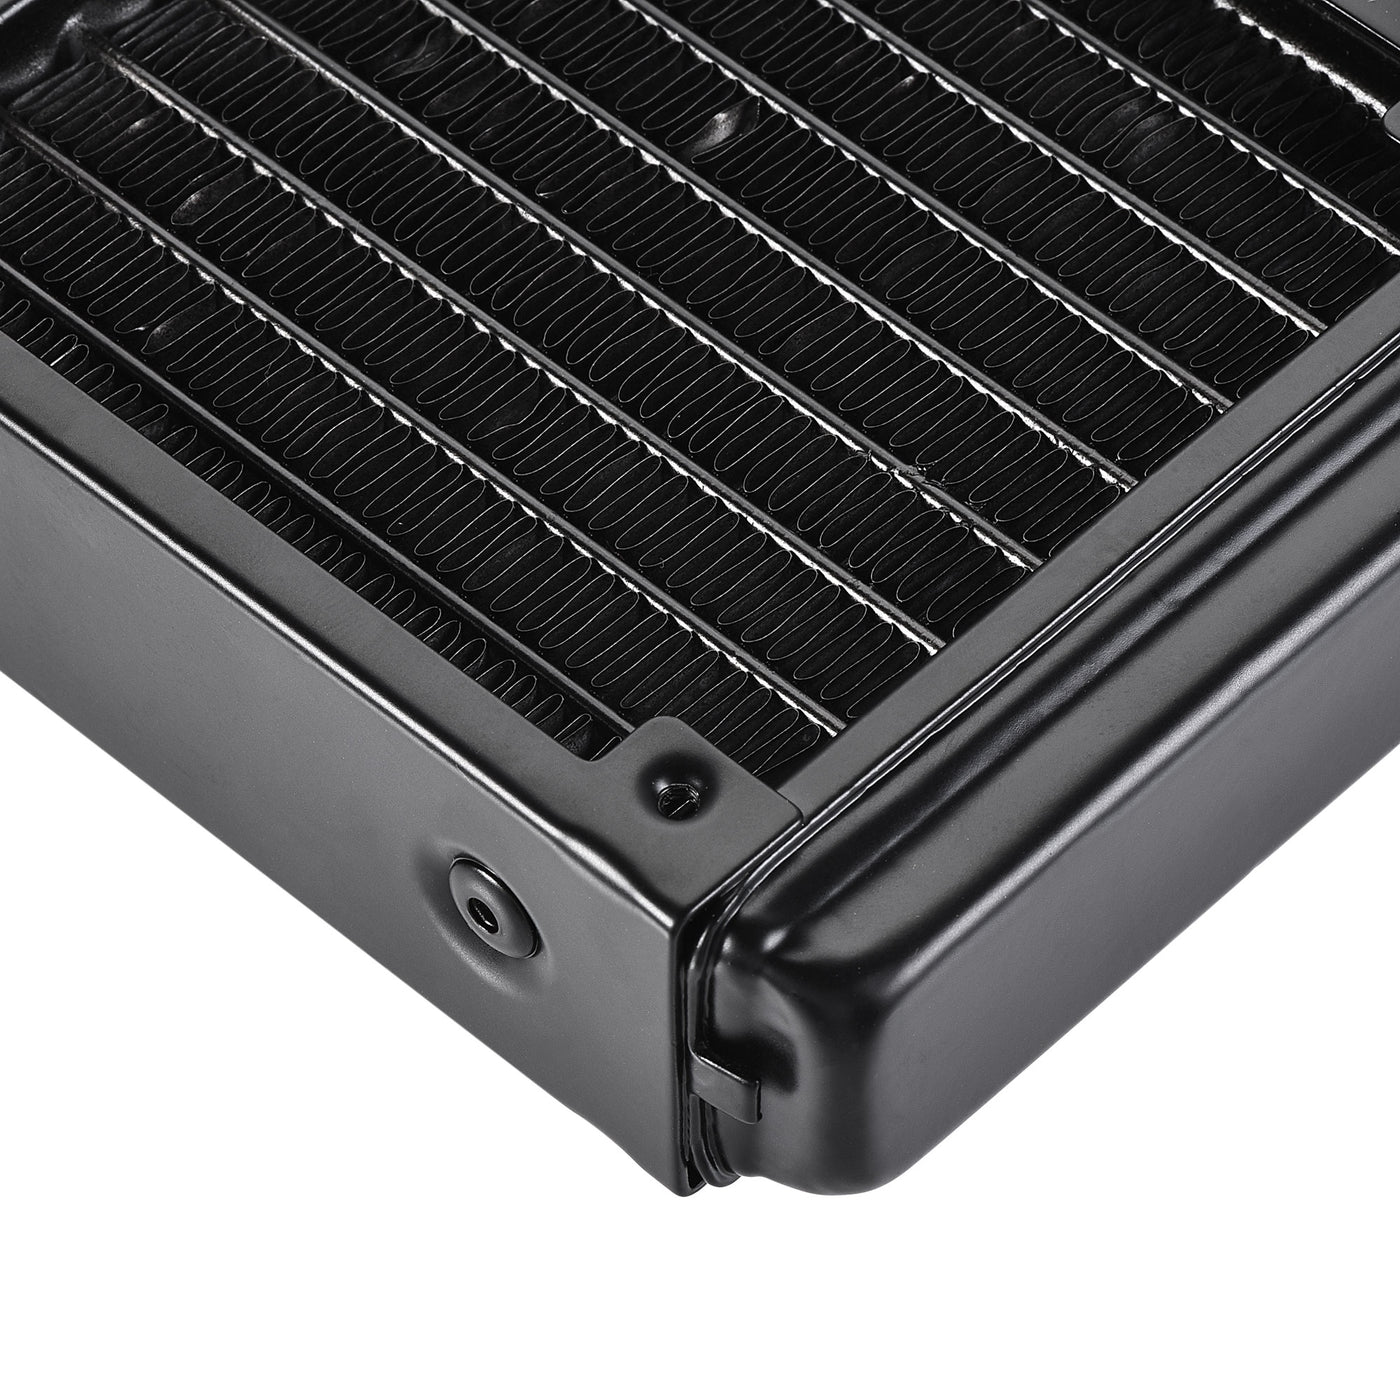 uxcell Uxcell Water Cooling Radiator for PC CPU 132mm Long 8mm Nozzle with 8 Aluminum Tubes